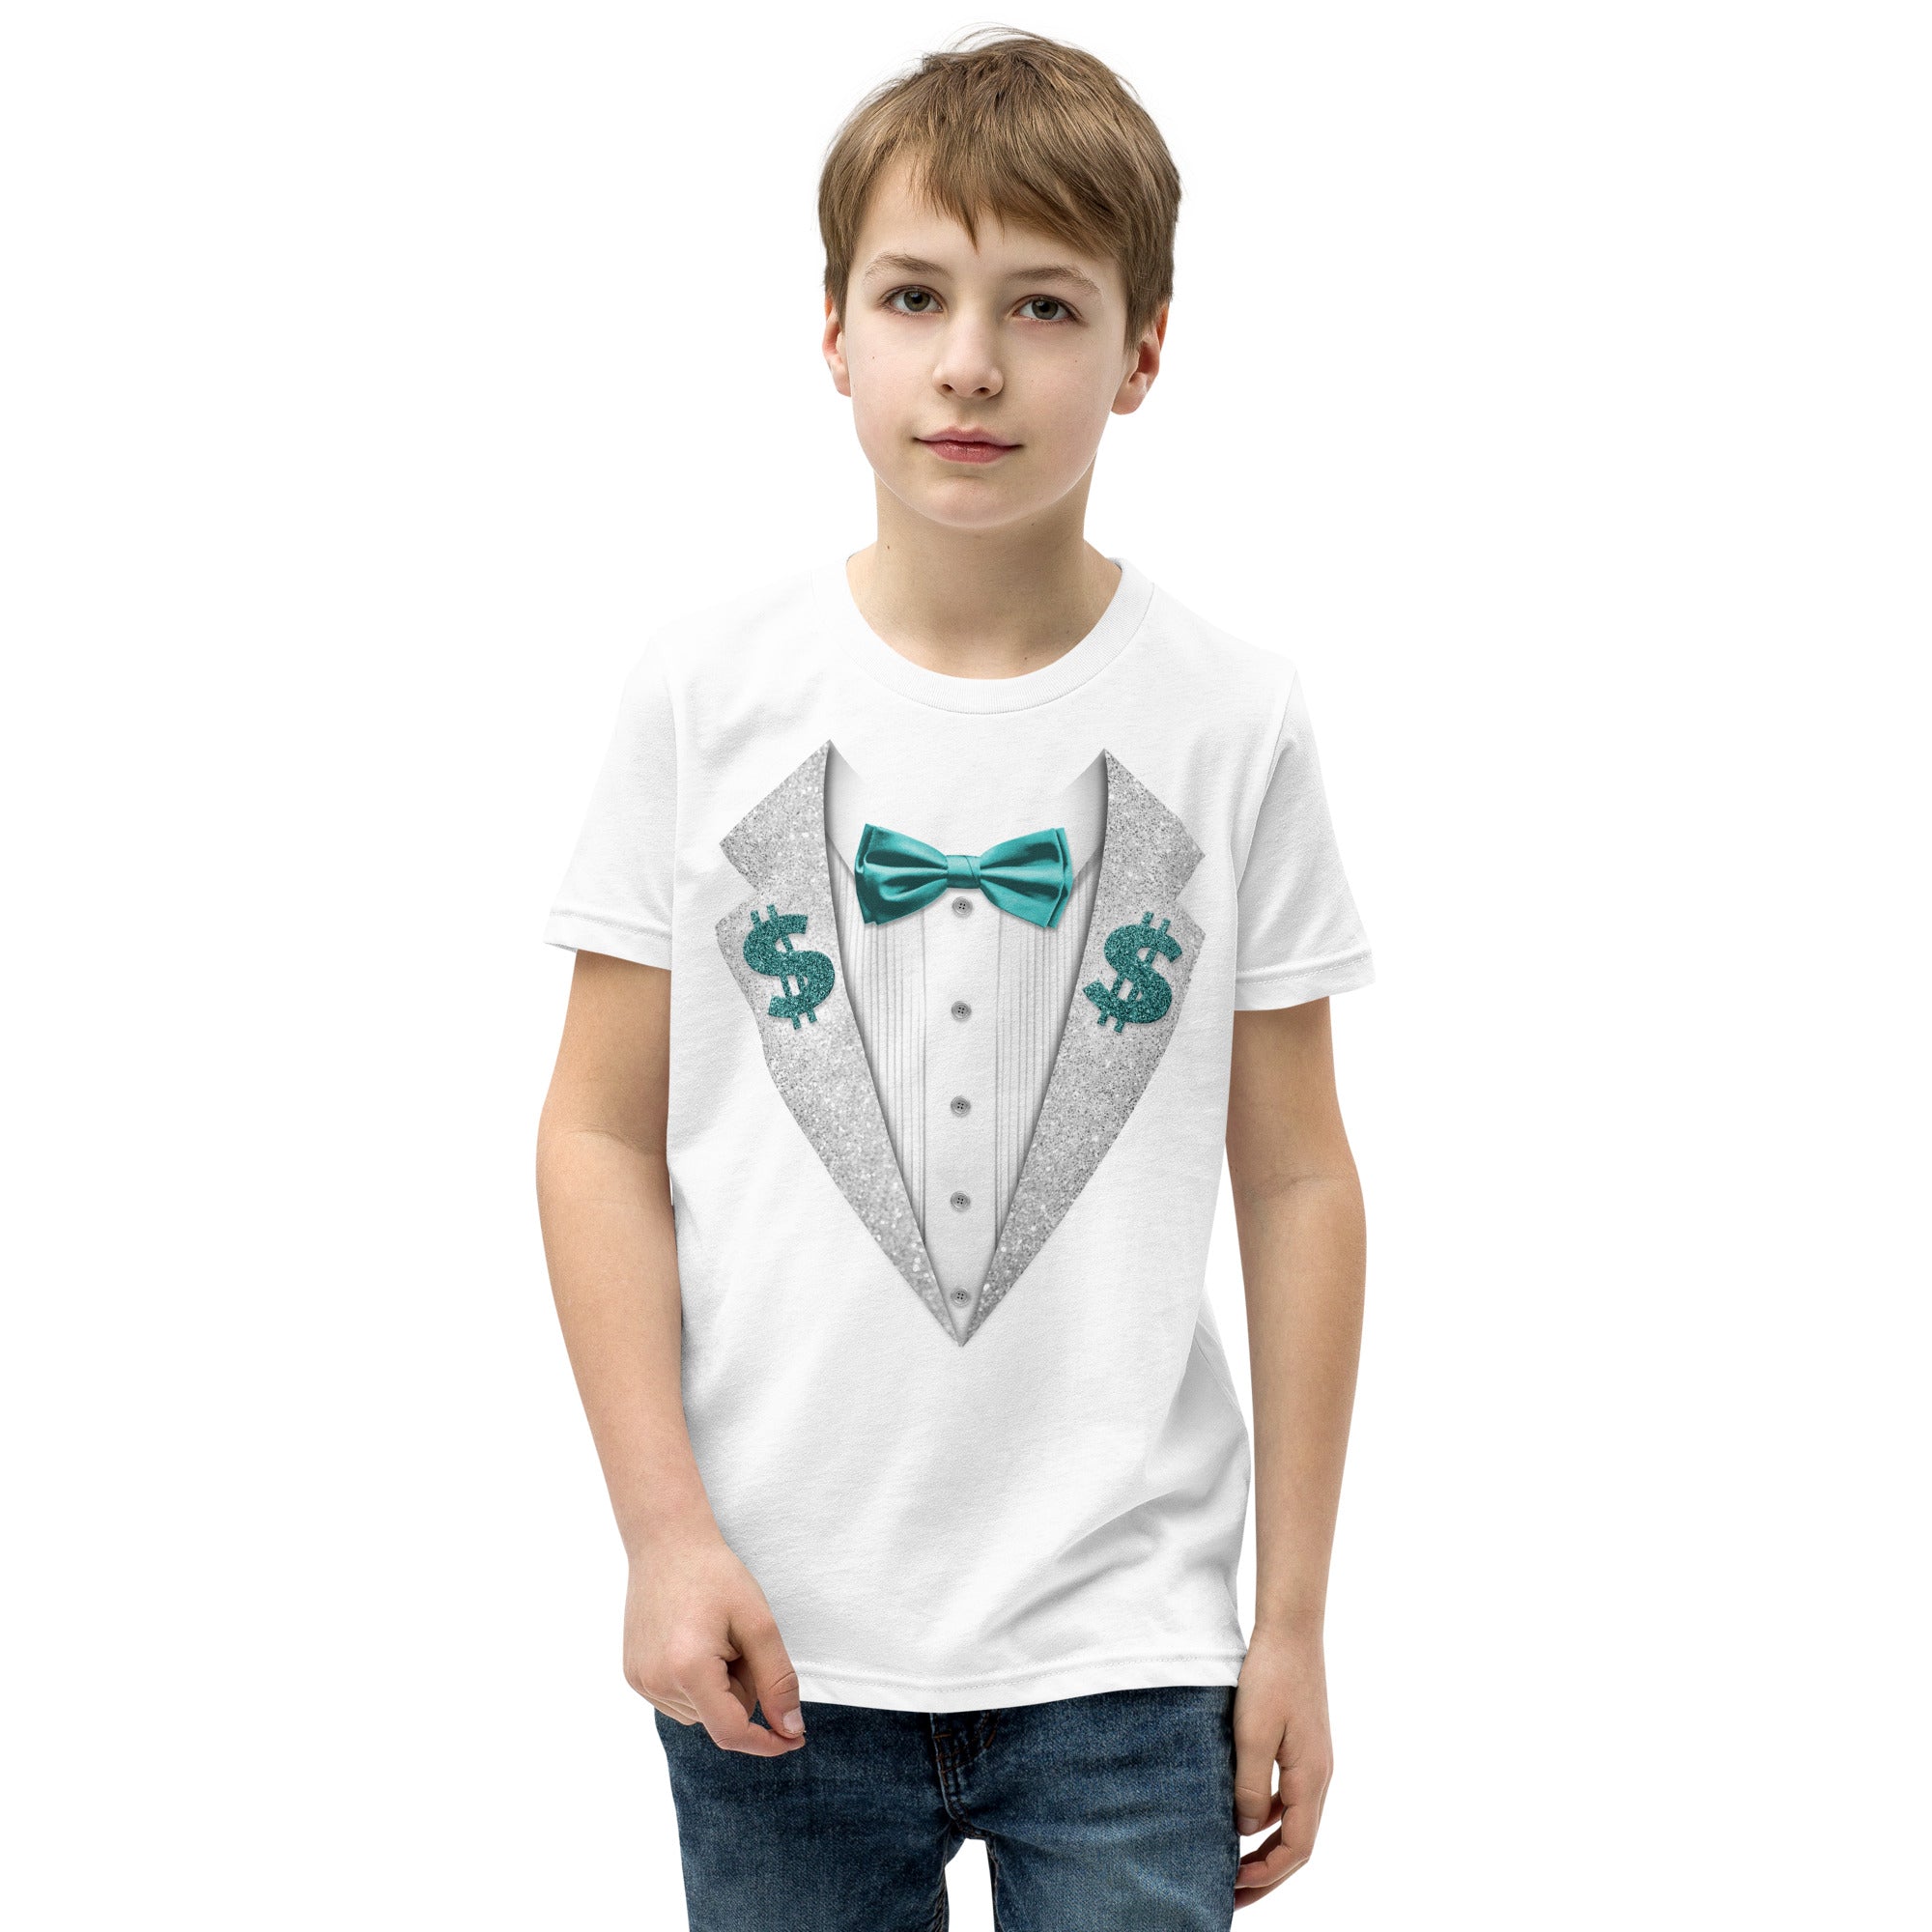 Ted DiBiase - Green Youth Suit Tee